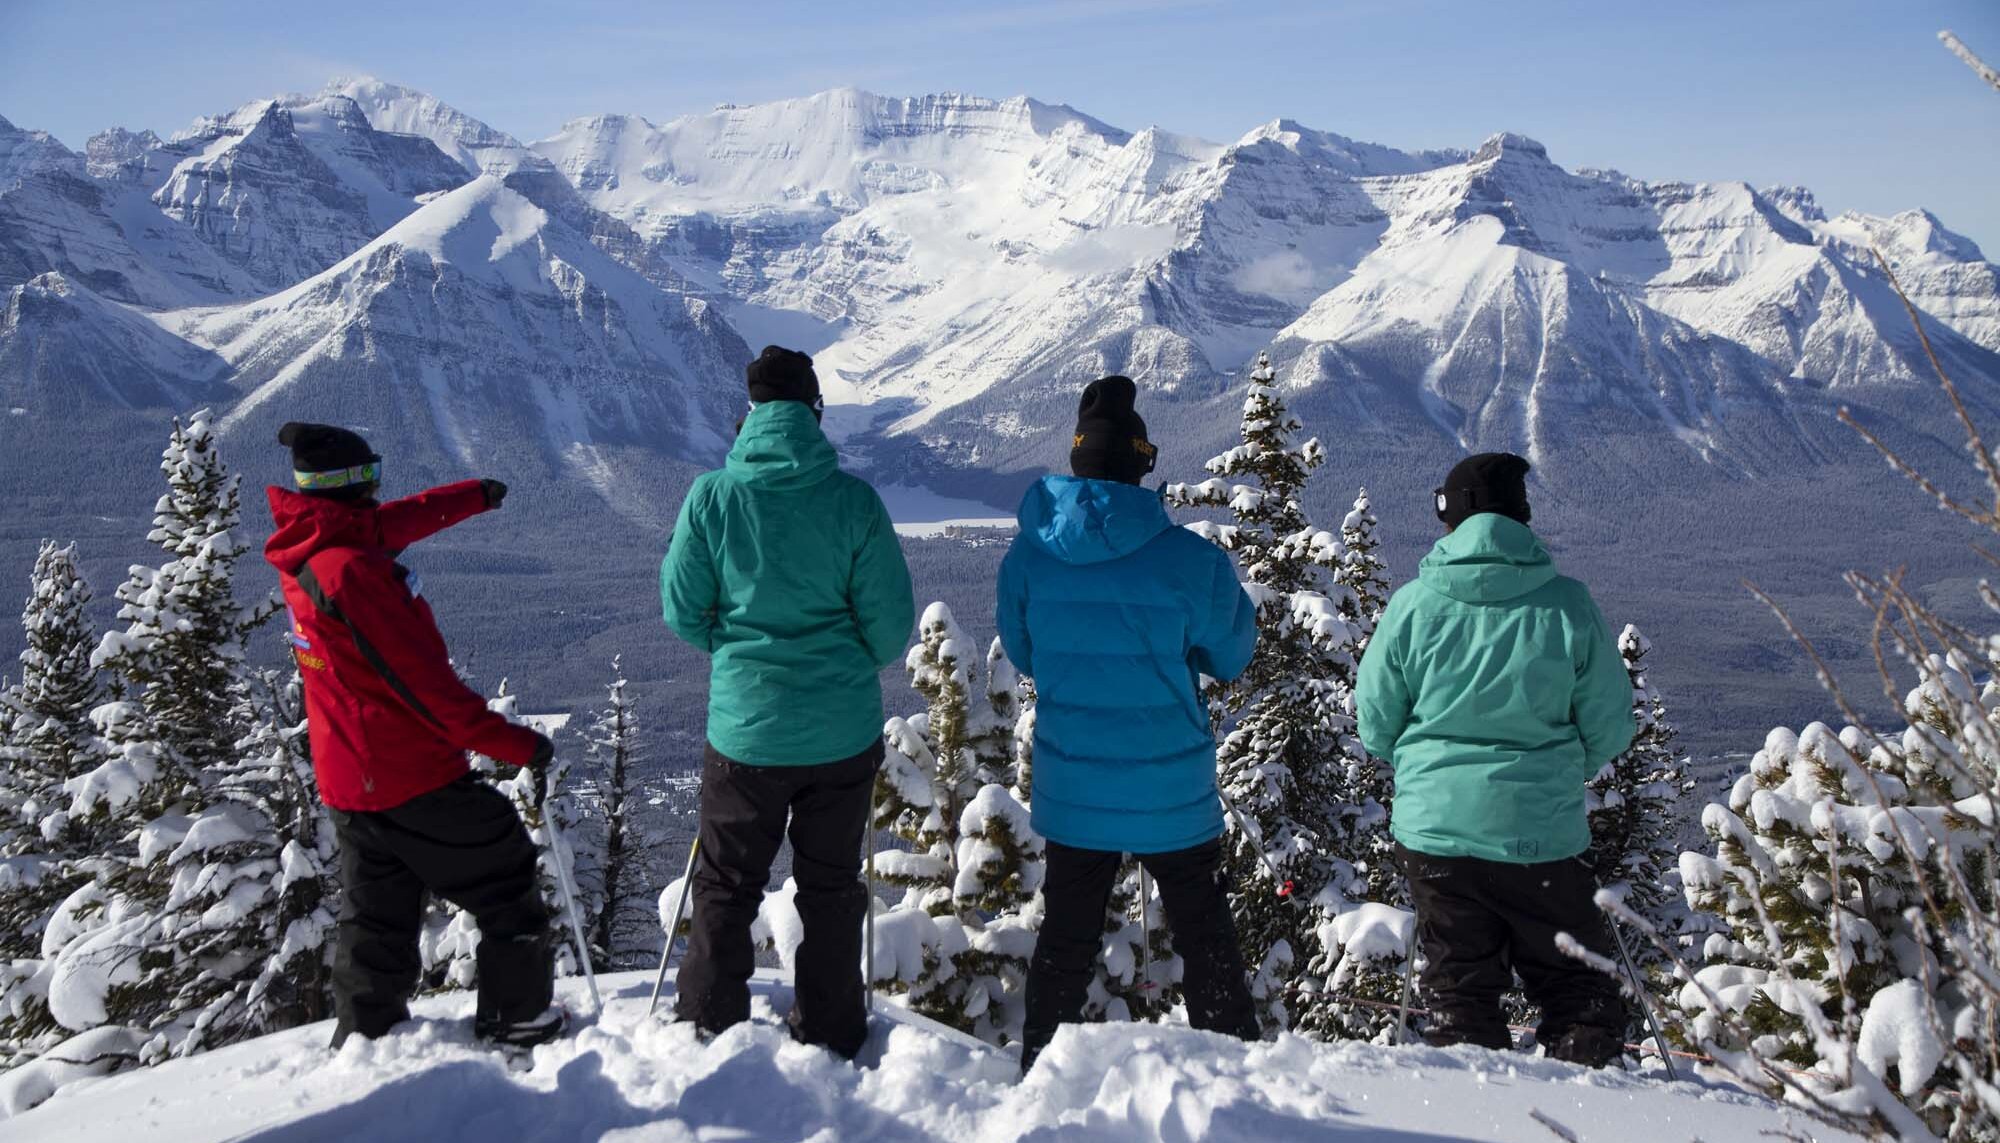 Checking out the views on a snowshoe tour at Lake Louise